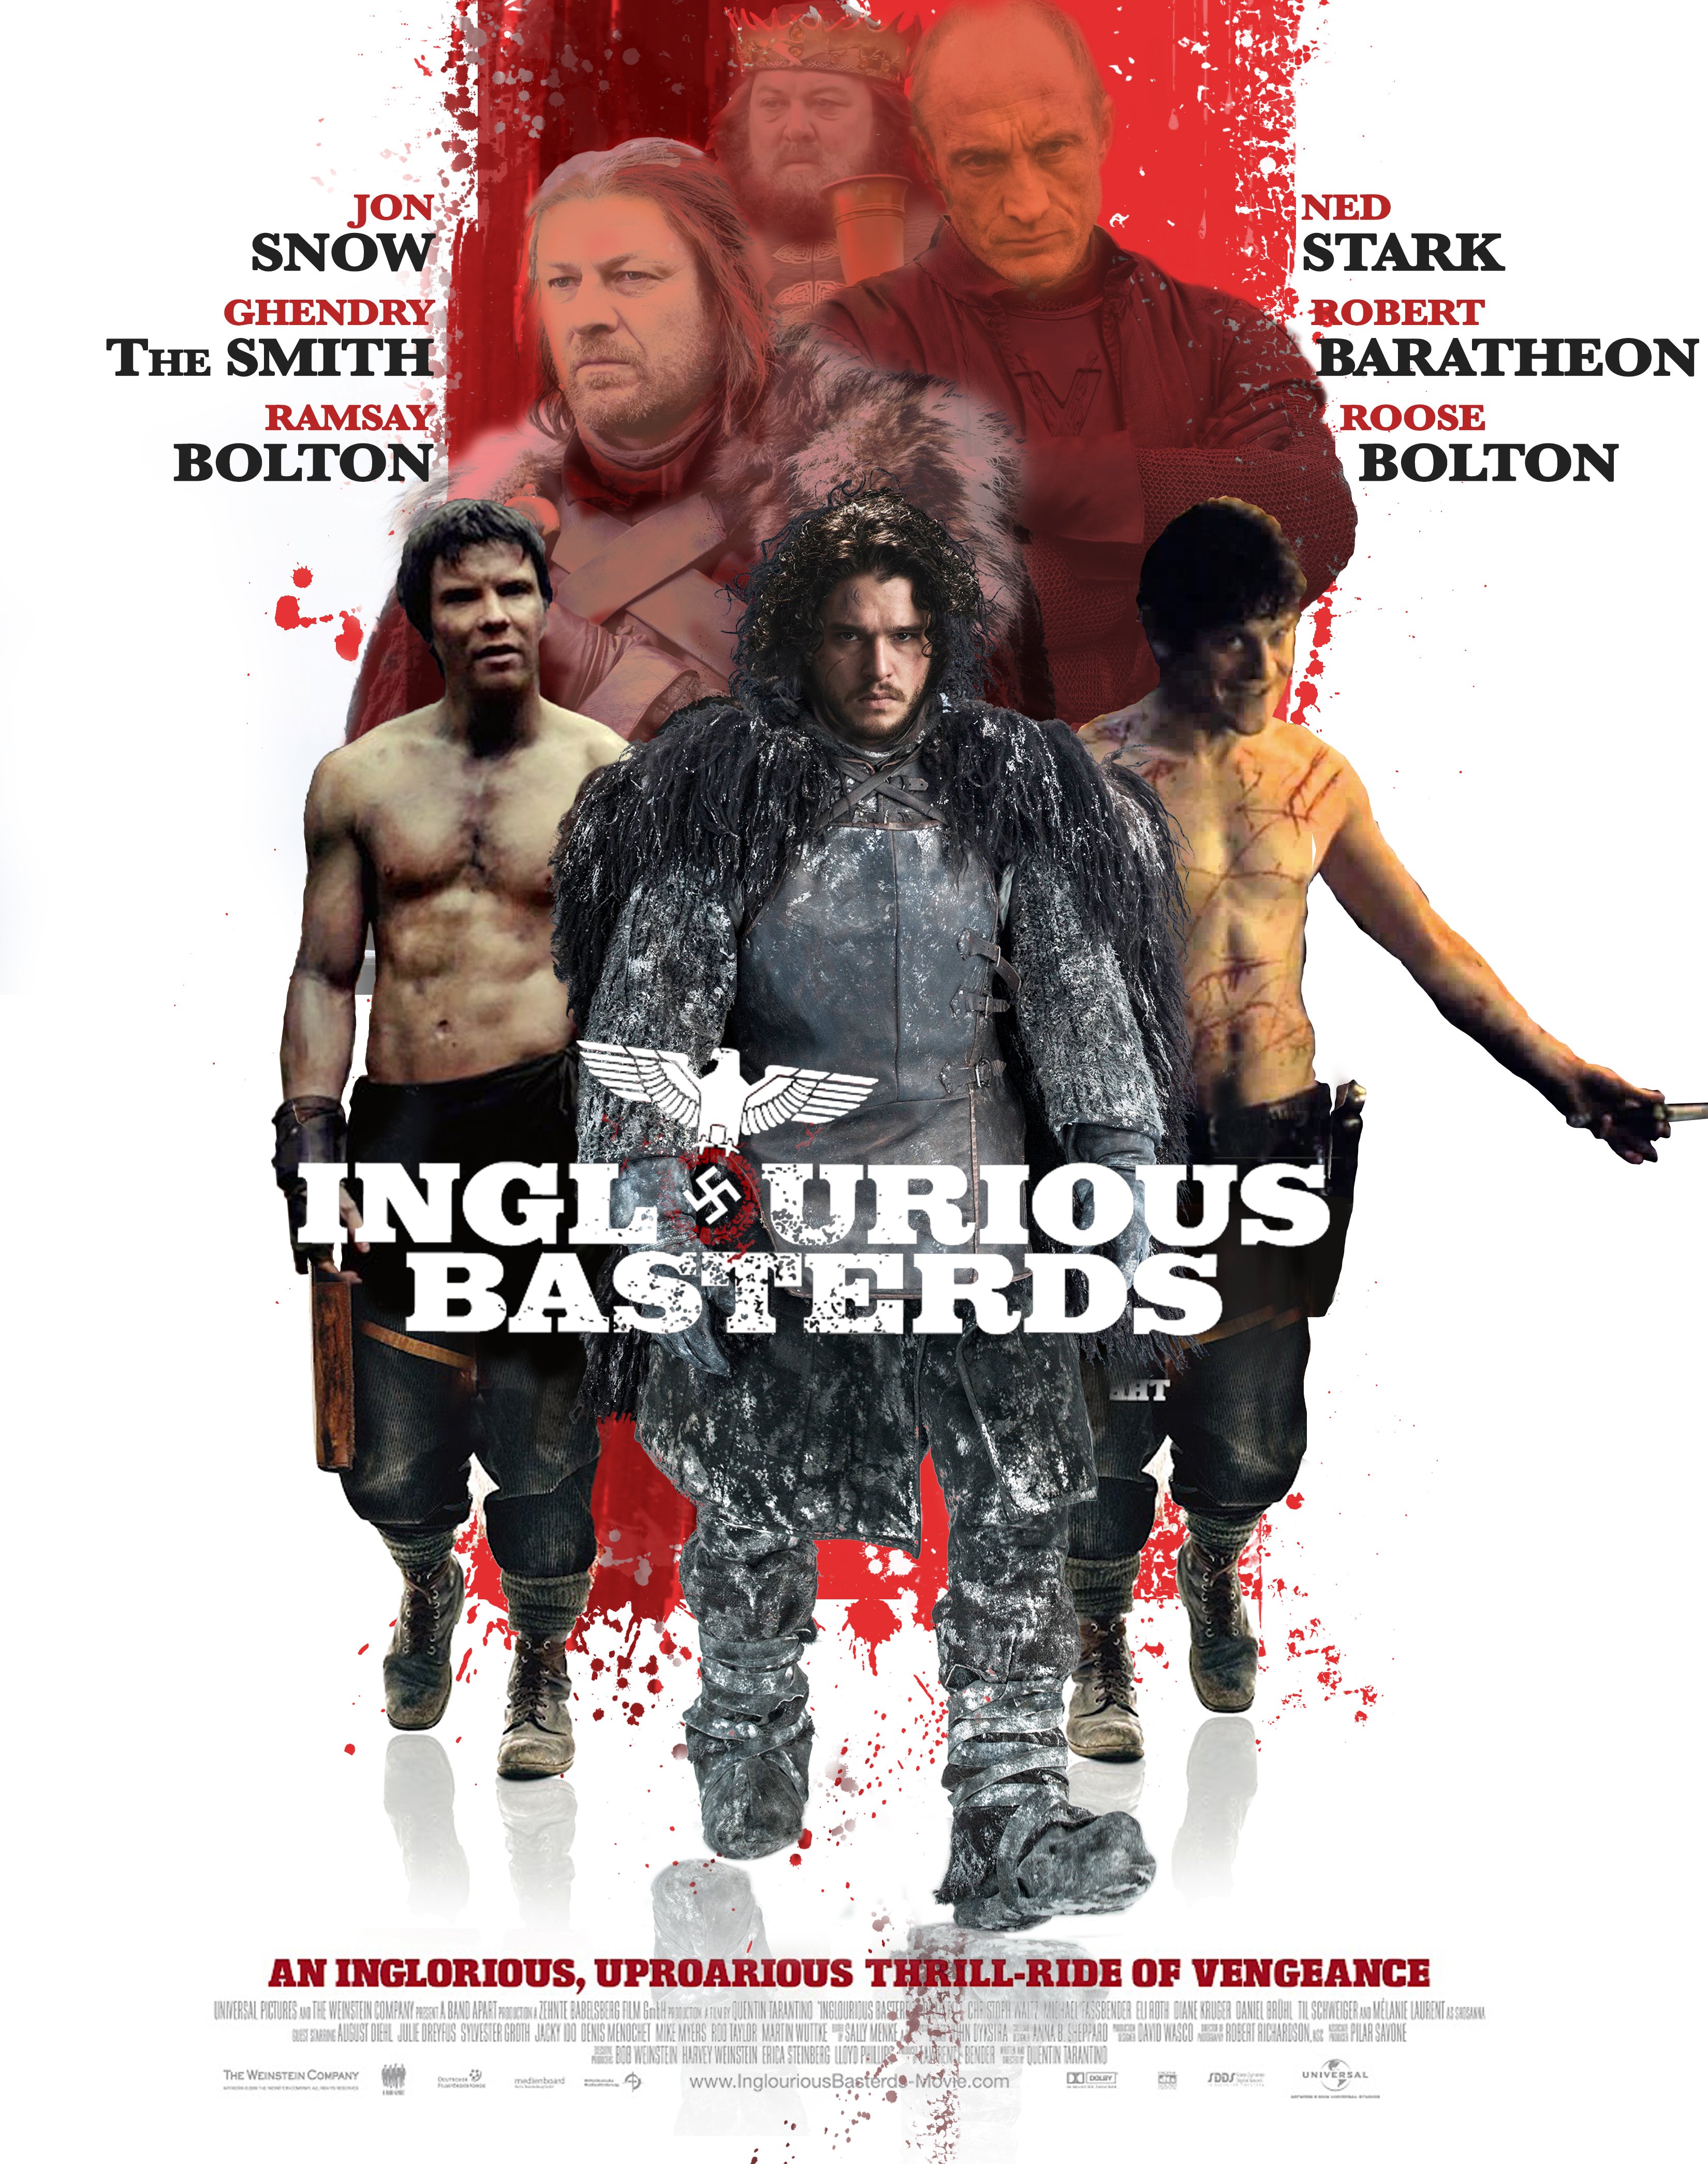 18 Hilarious Game Of Thrones Spin-Off Movies